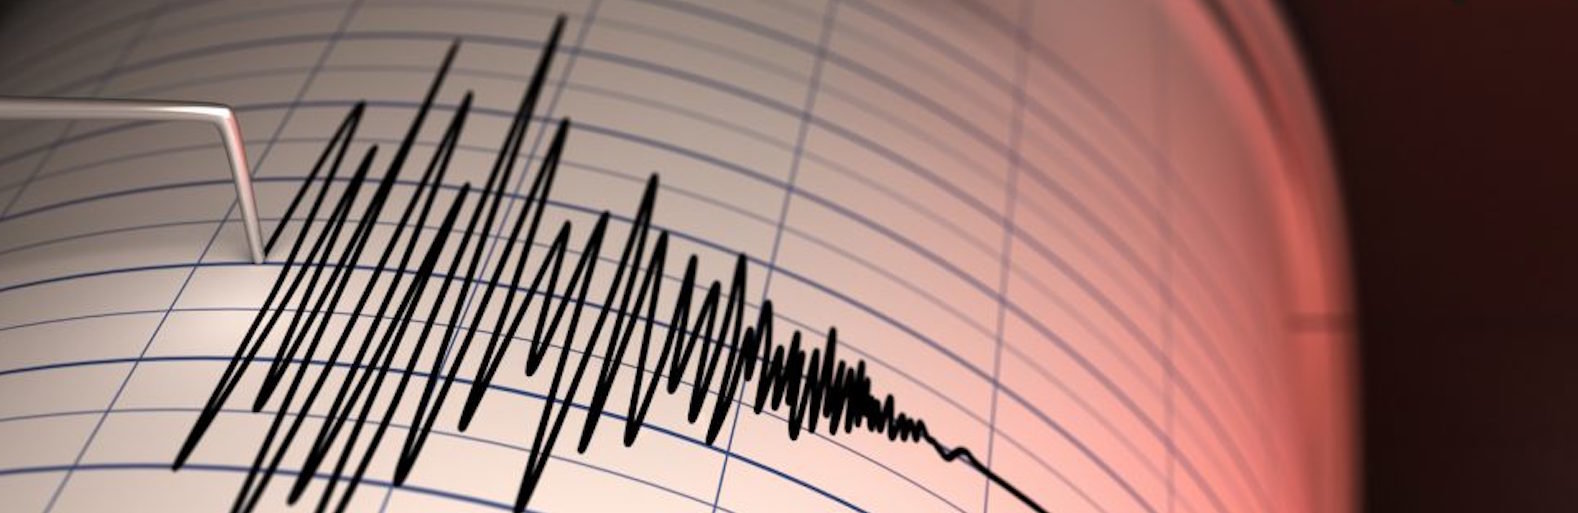 The fourth earthquake in a day occurred in Central Asia